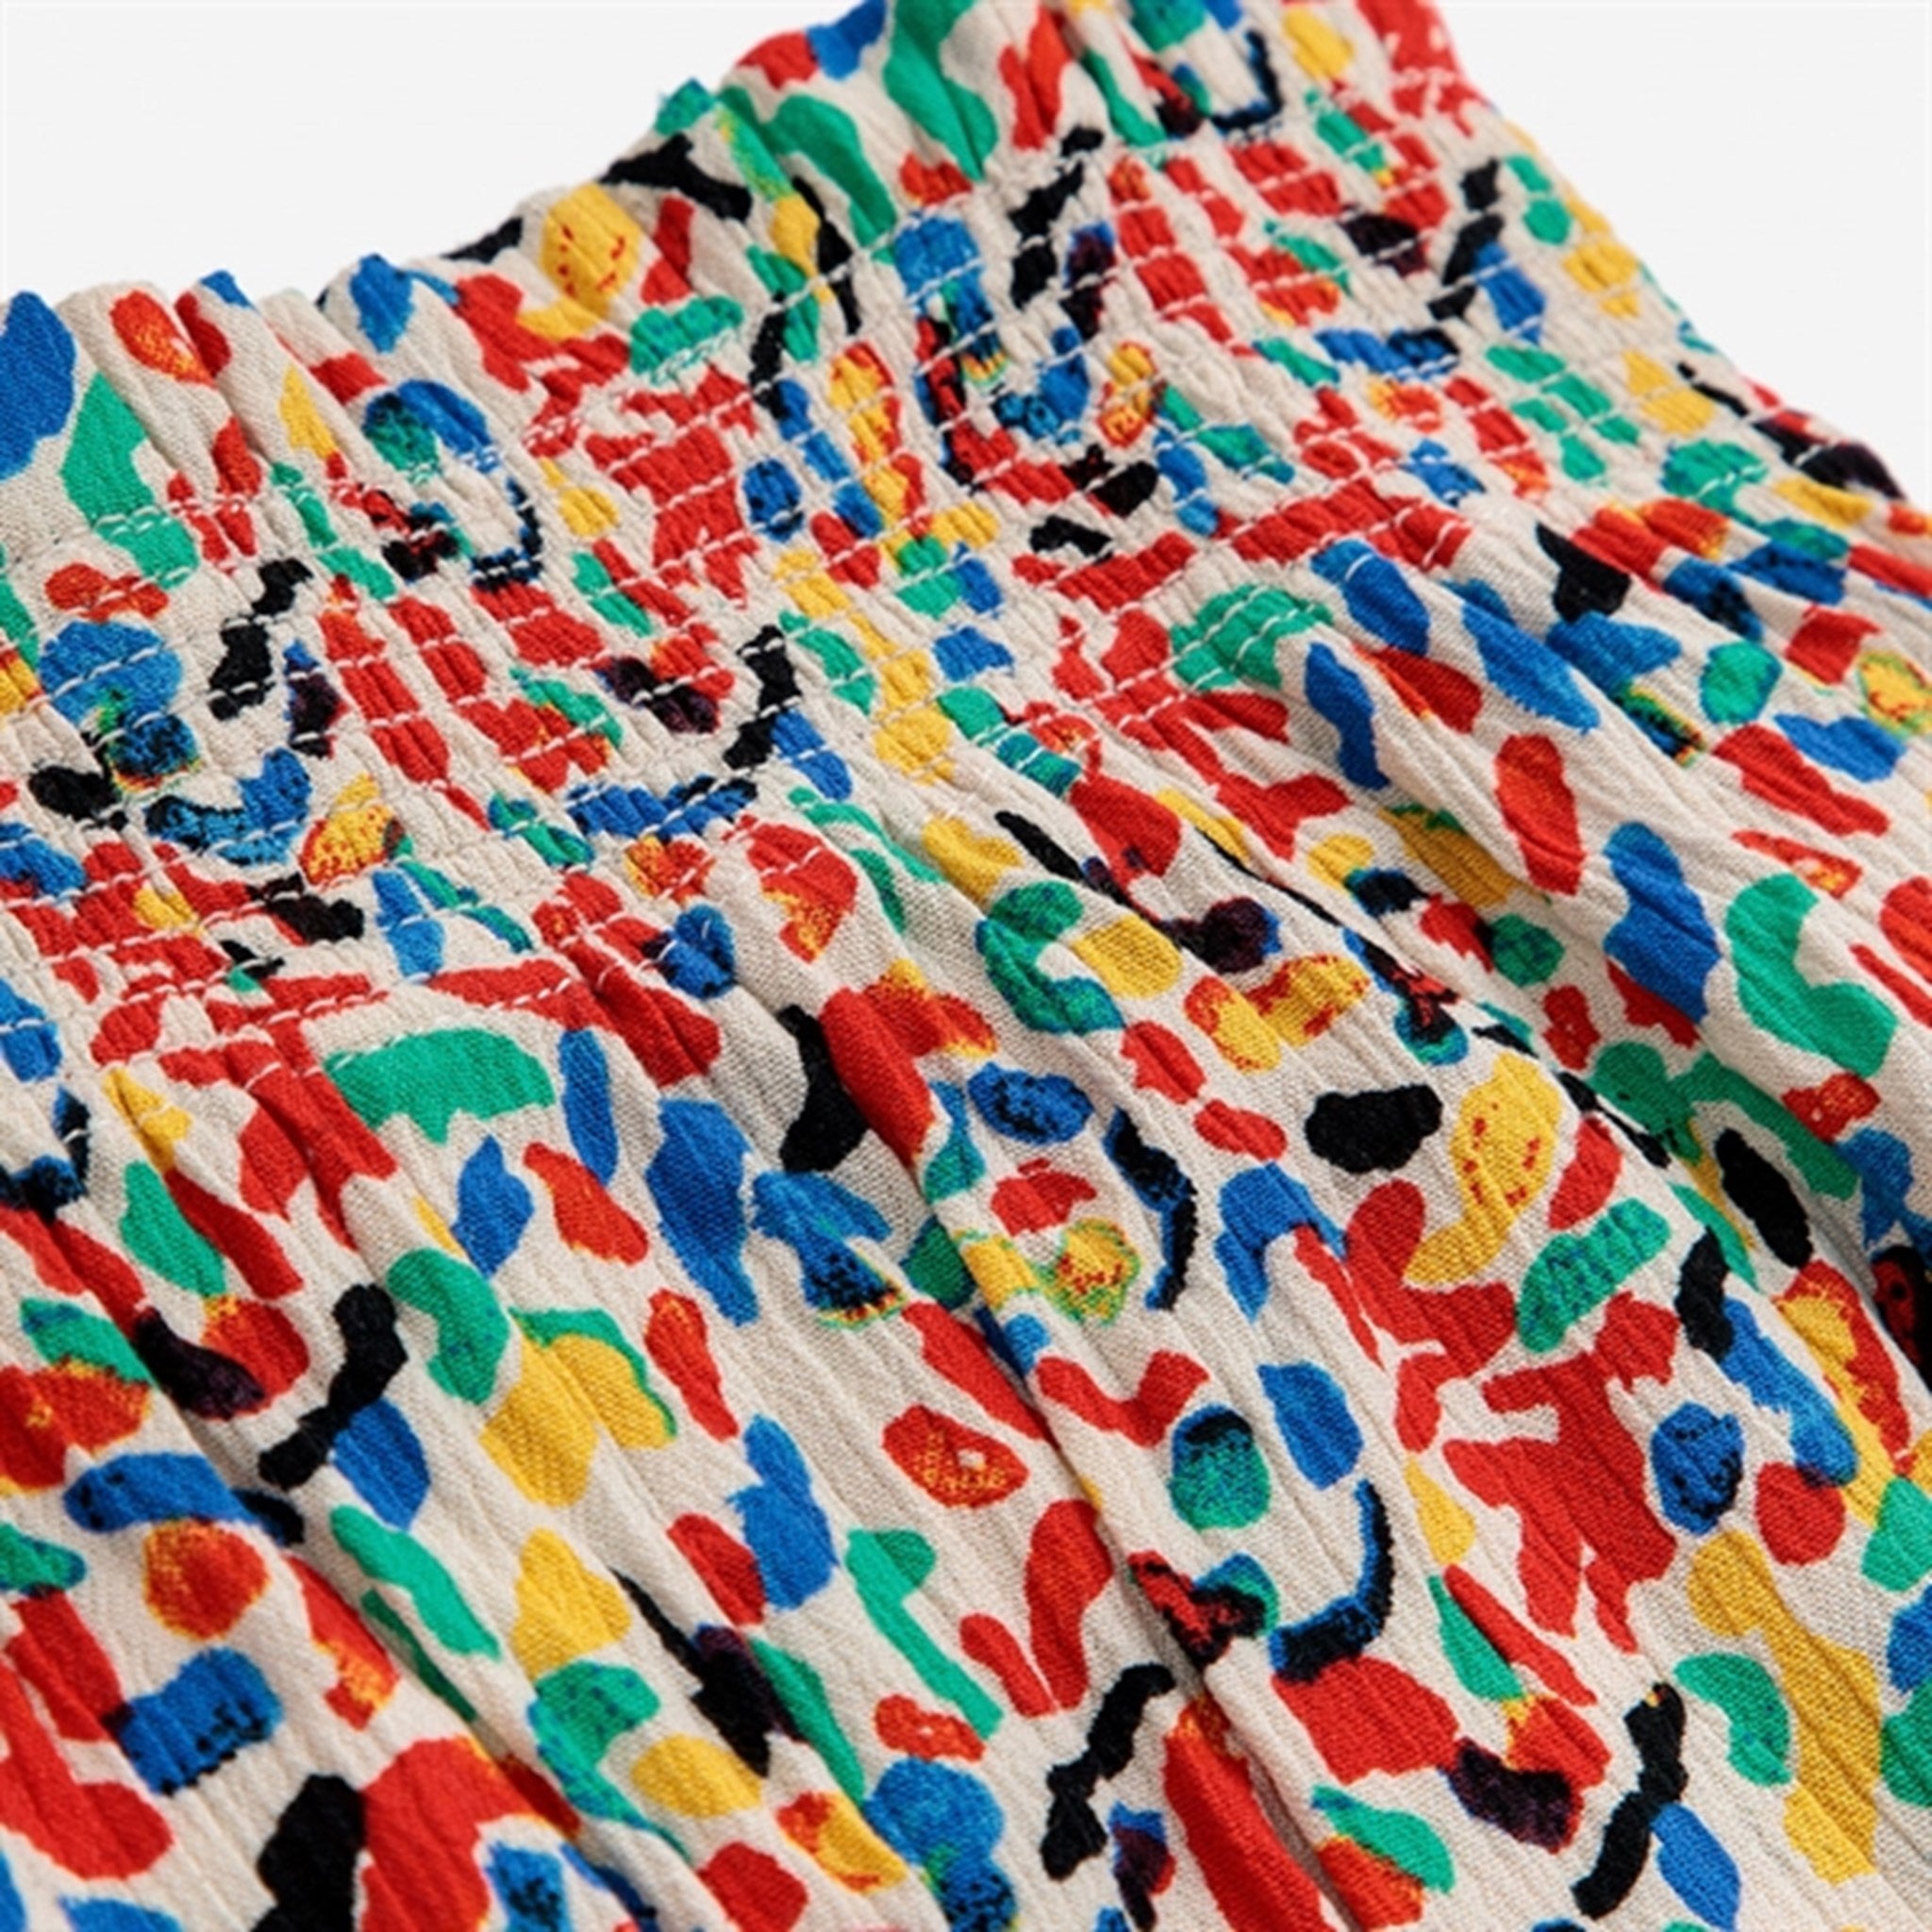 Bobo Choses Baby Confetti All Over Woven Harem Pants Baggy Multicolor 4